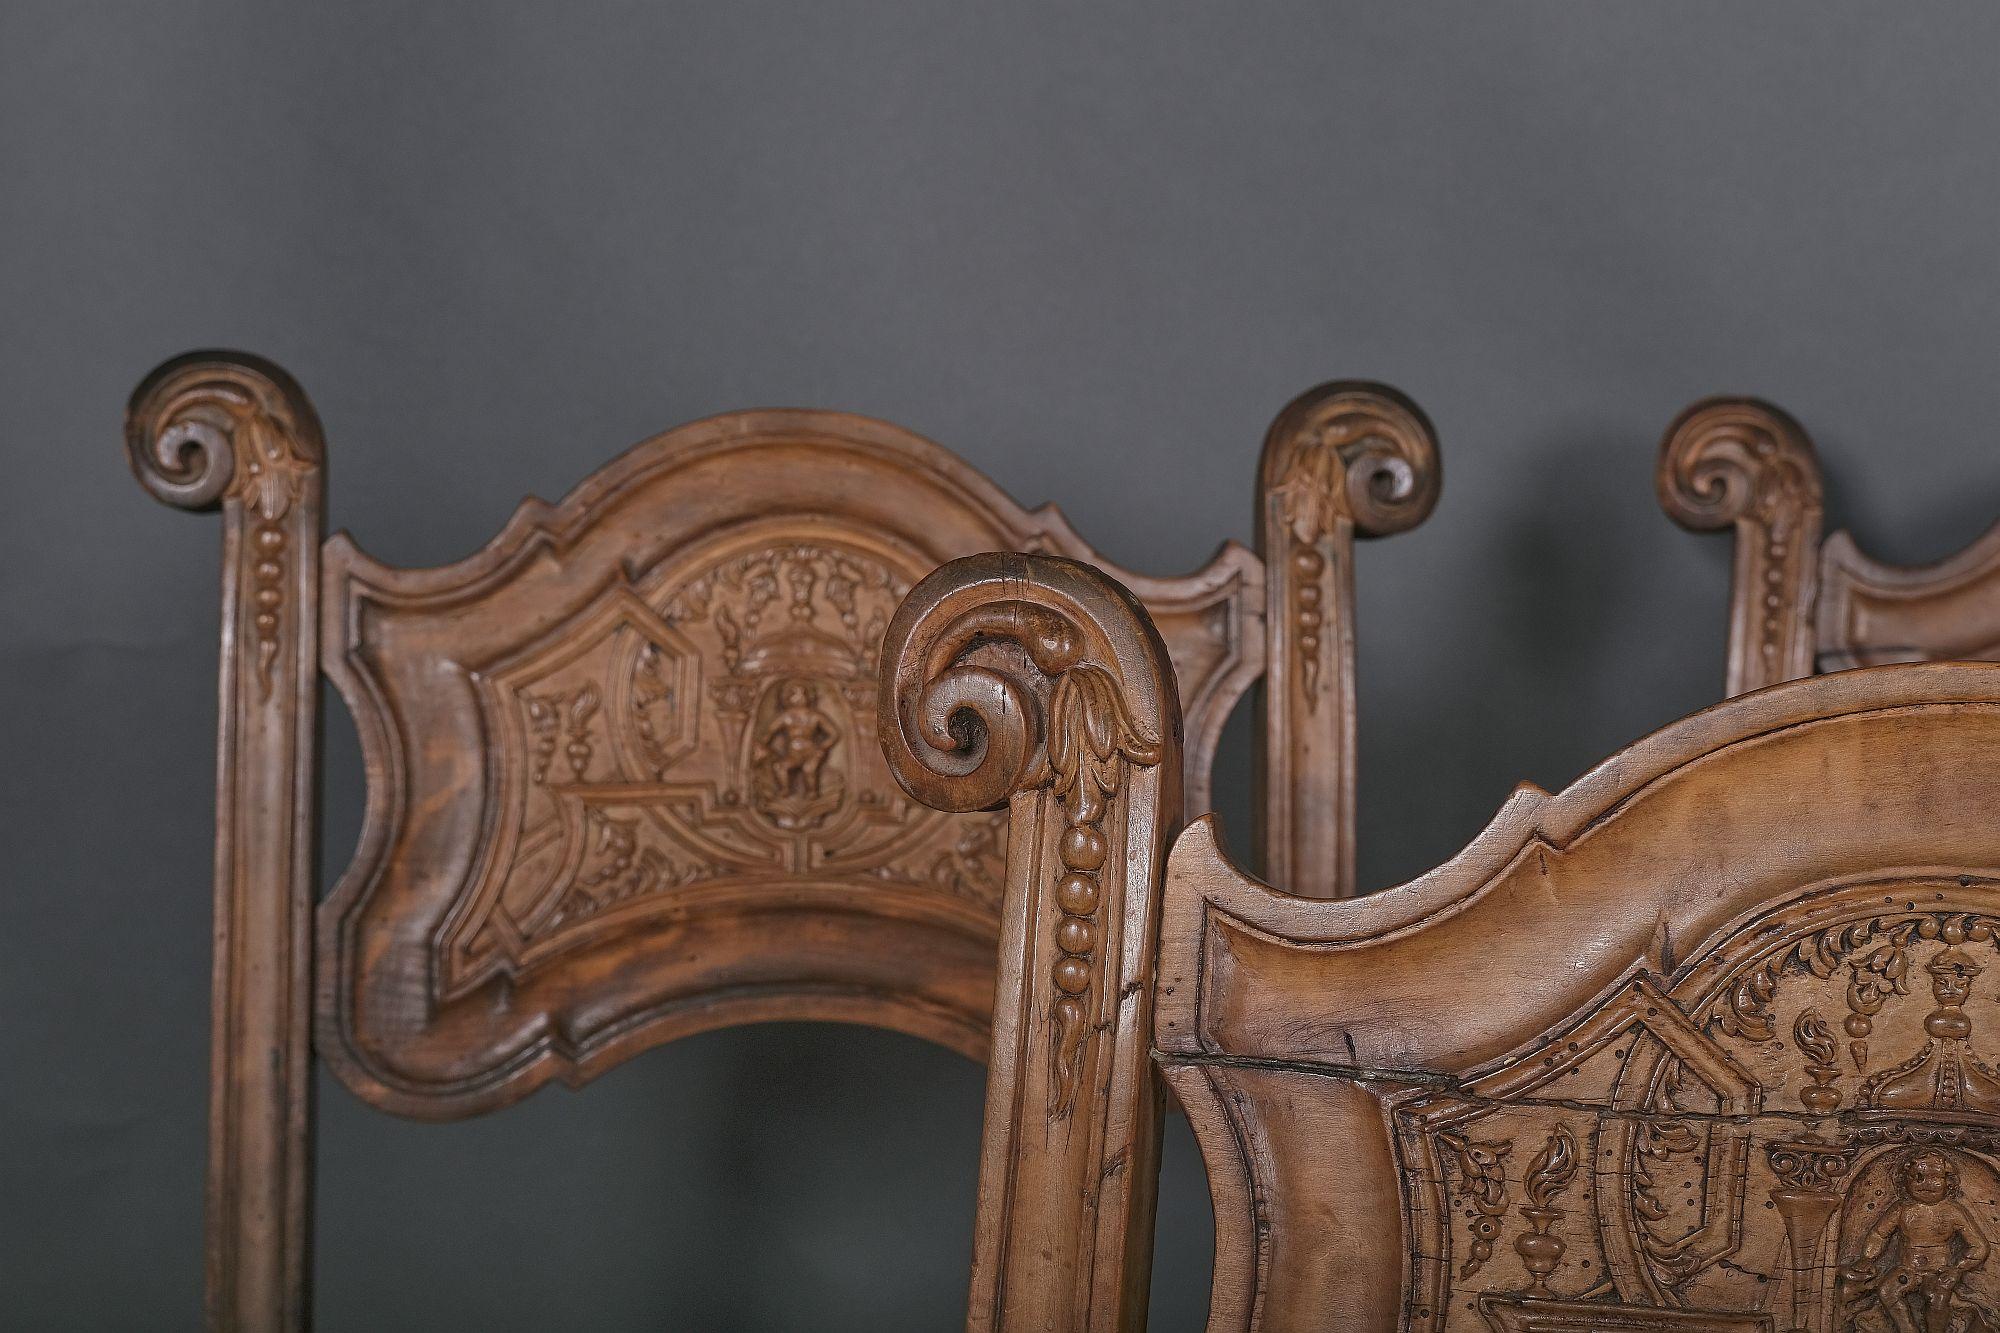 Very beautiful suite of six master chairs perfectly carved with all the details of Louis XIV decoration. On the dossiers there are angels in niches centered and framed with valances and crisscrossing ribbons decorated in a symmetrical way. Between